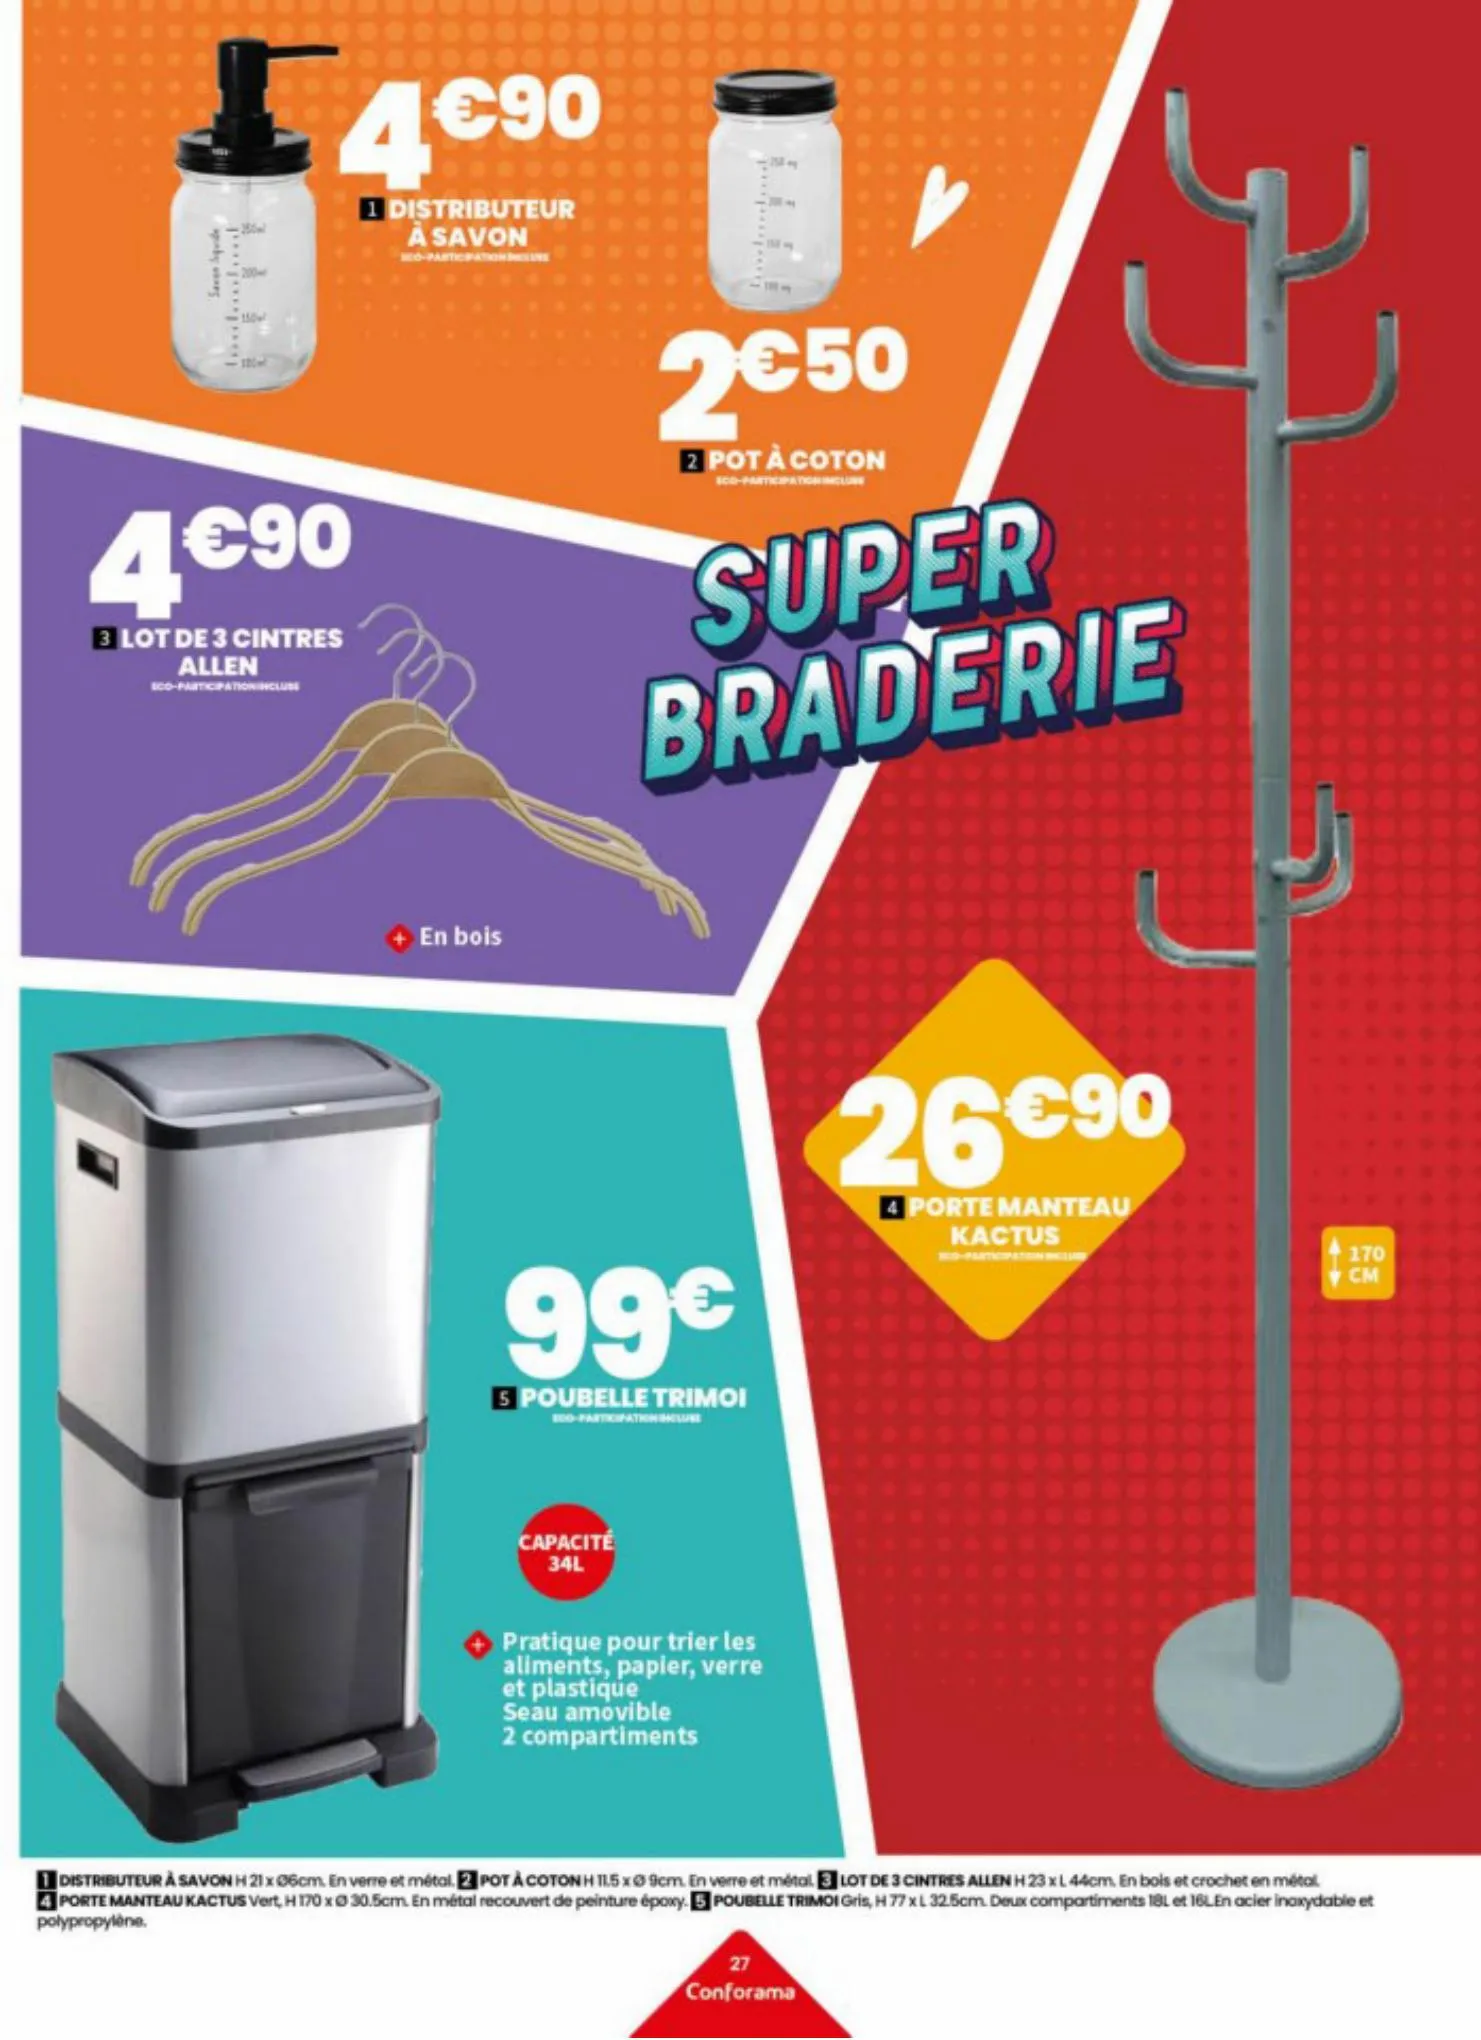 Catalogue Super braderie, page 00027